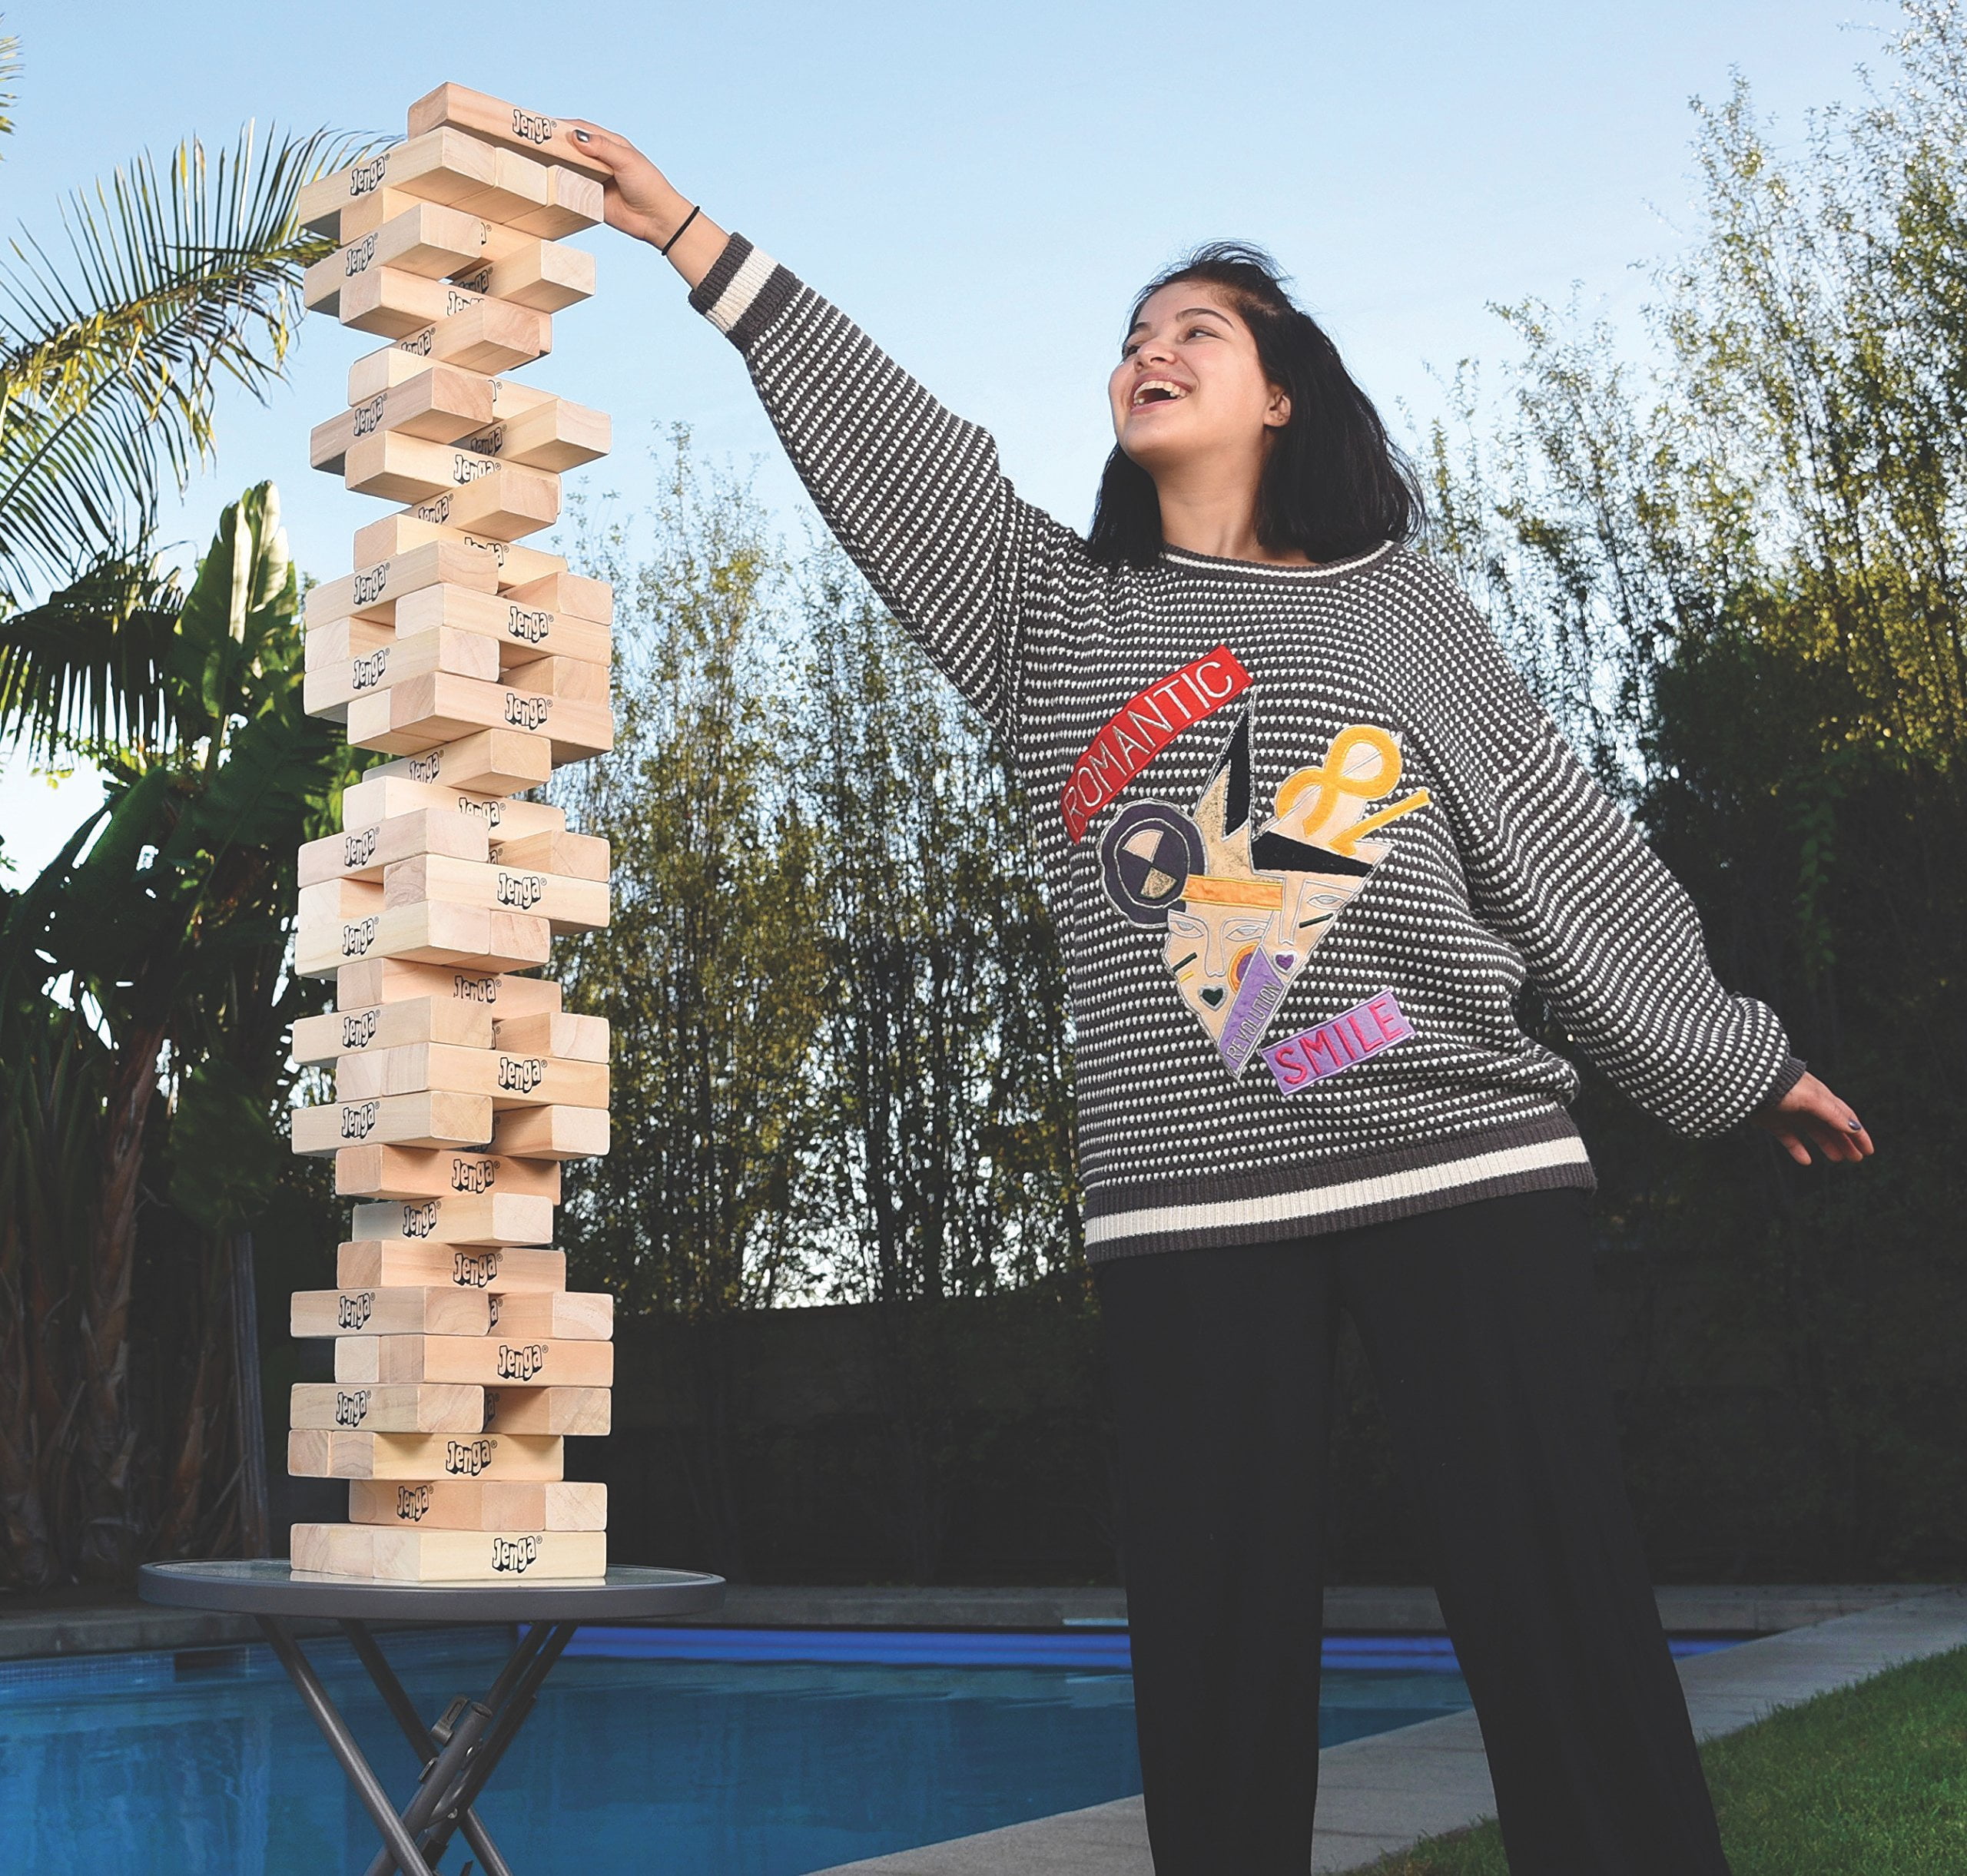  Jenga Giant - Stacks to Over 5 feet - Officially Licensed - JS7  : Everything Else